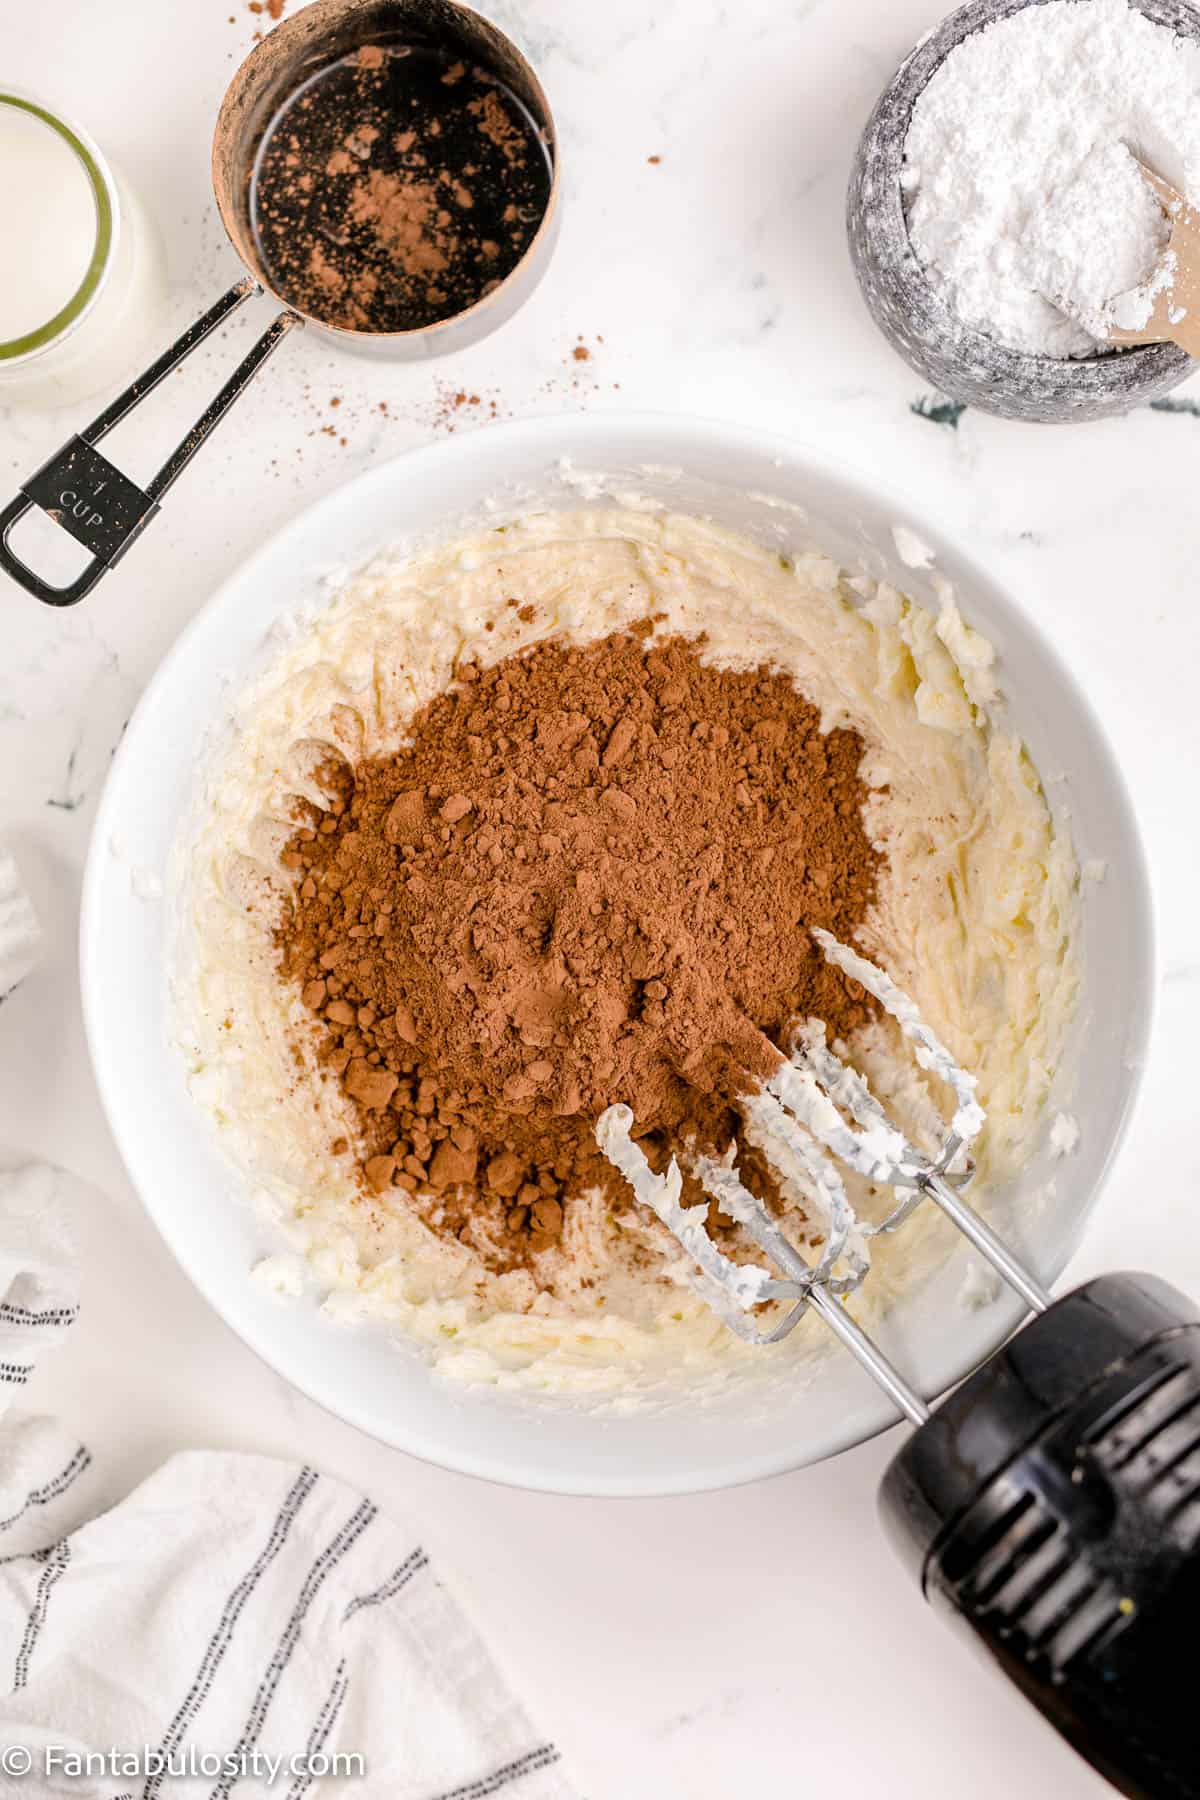 Cocoa powder in mixing bowl